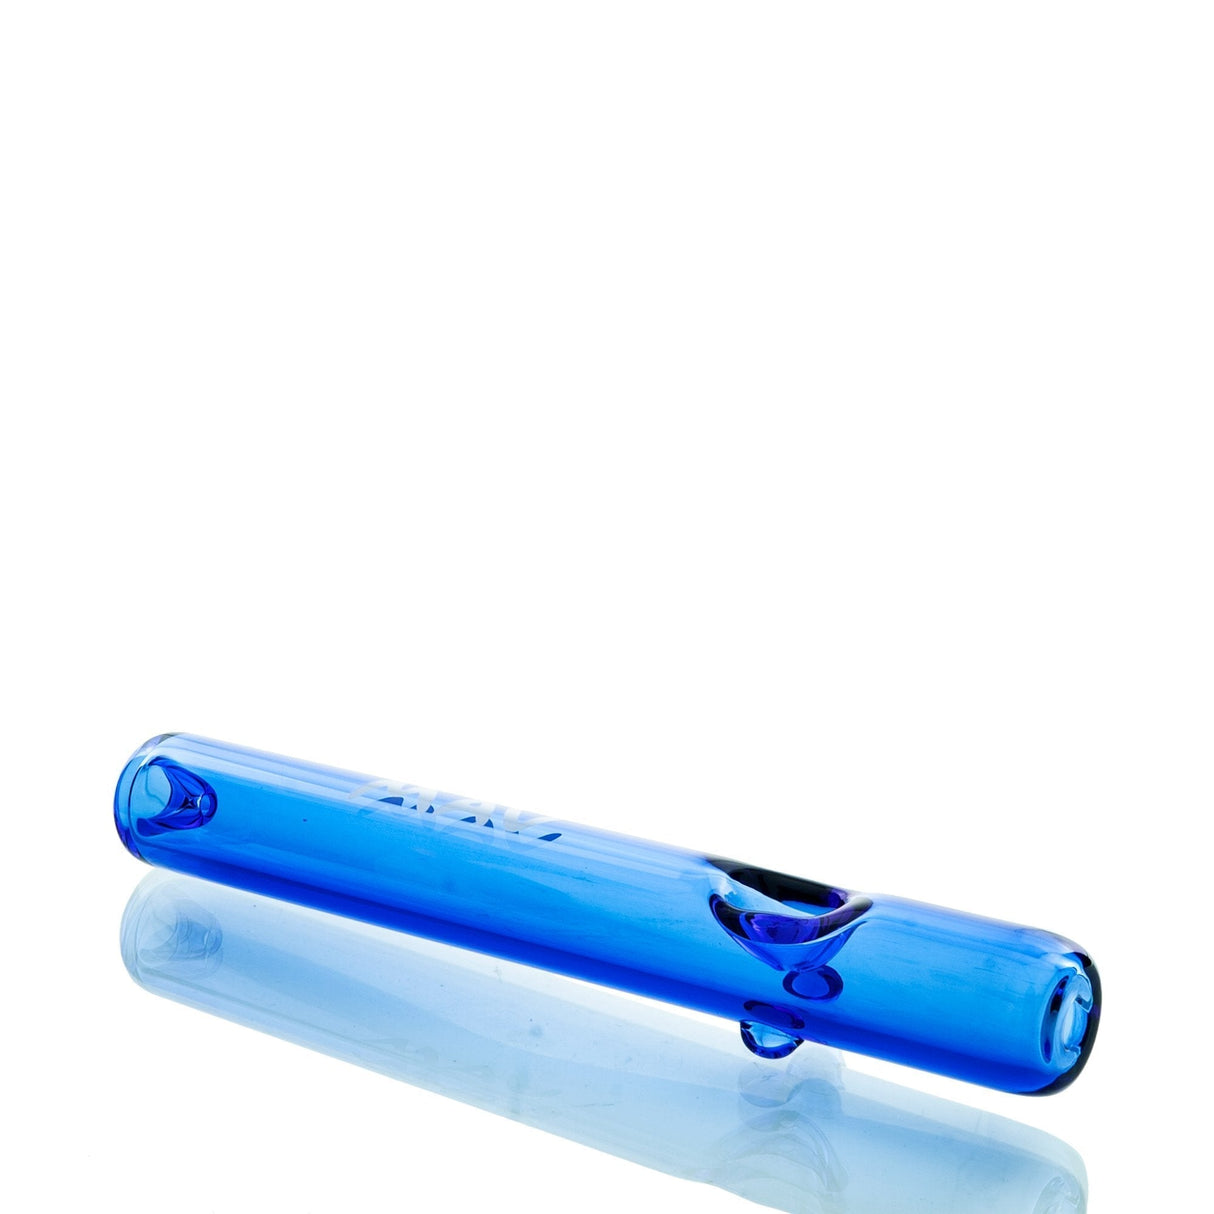 MAV Glass 7" Steamroller in Ink Blue - Side View on White Background